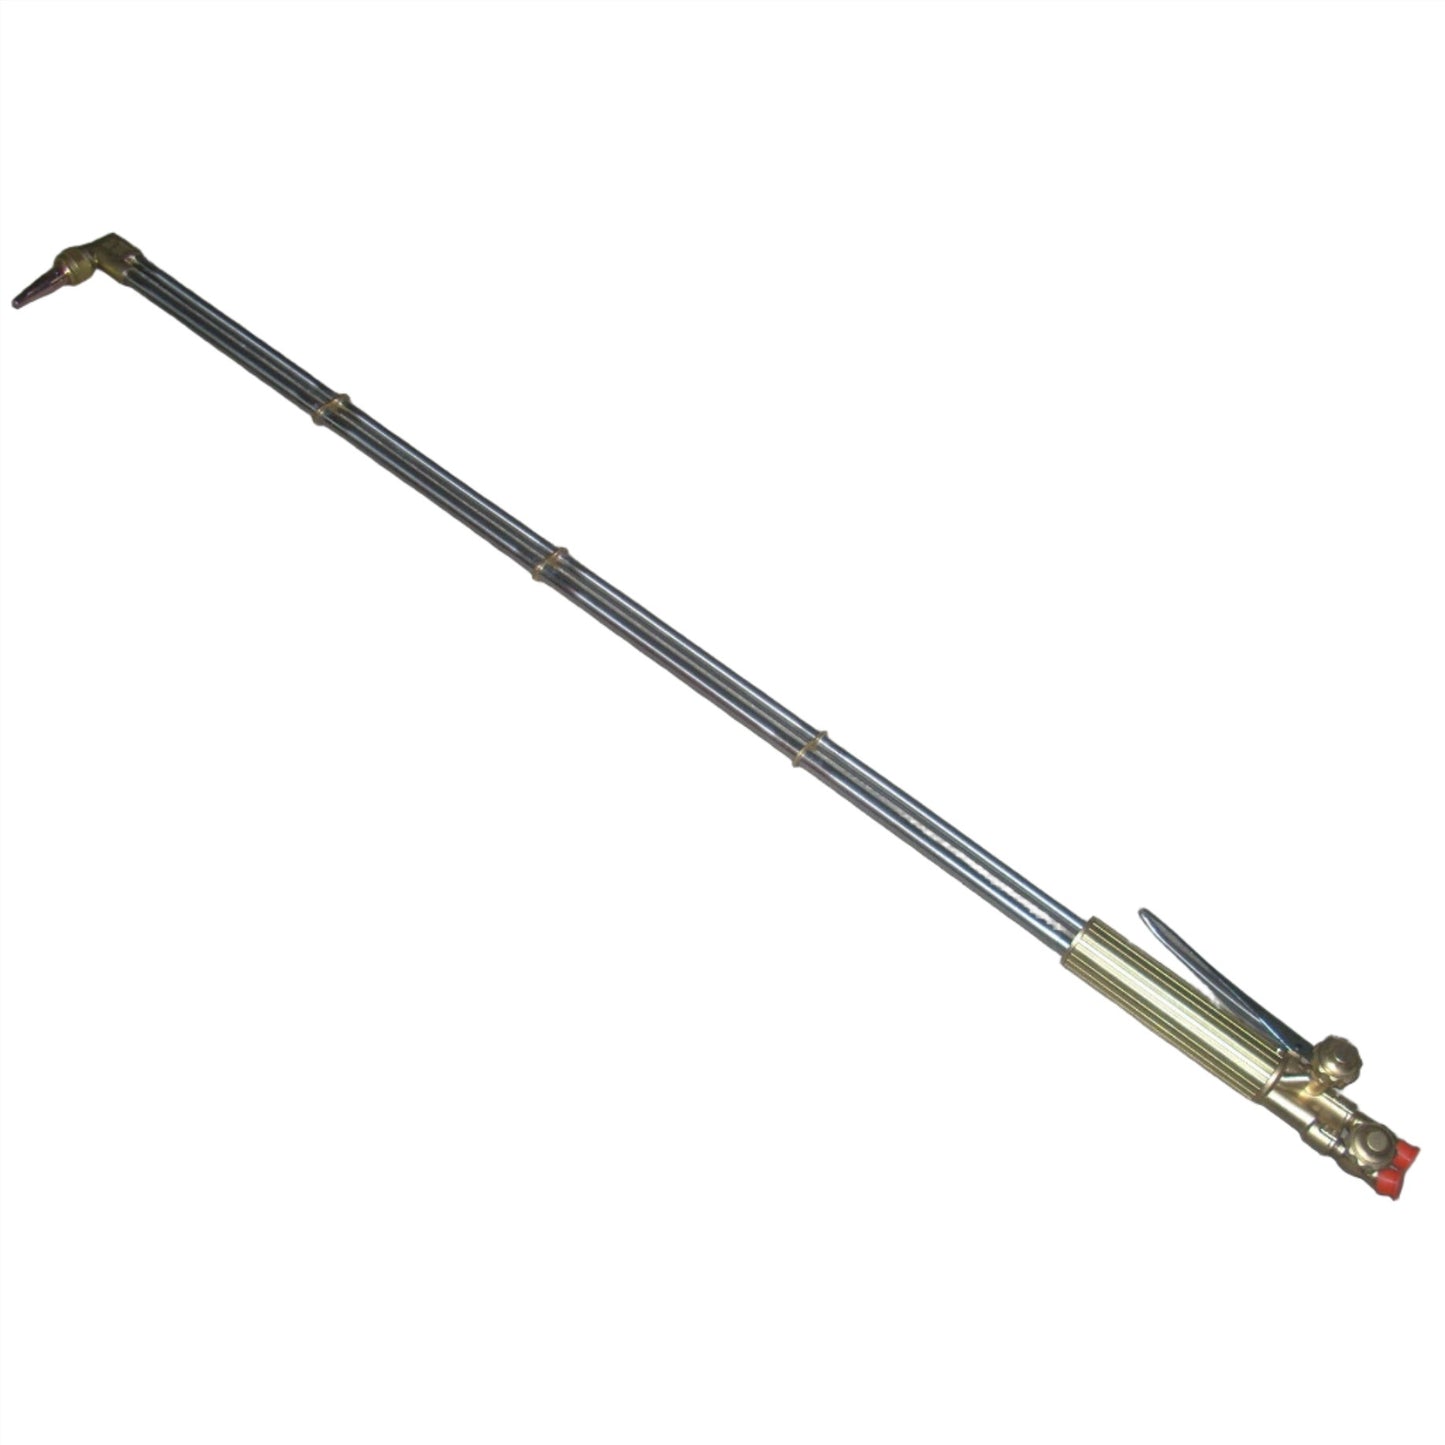 Victor style 48" Acetylene Cutting Torch 90 Degree